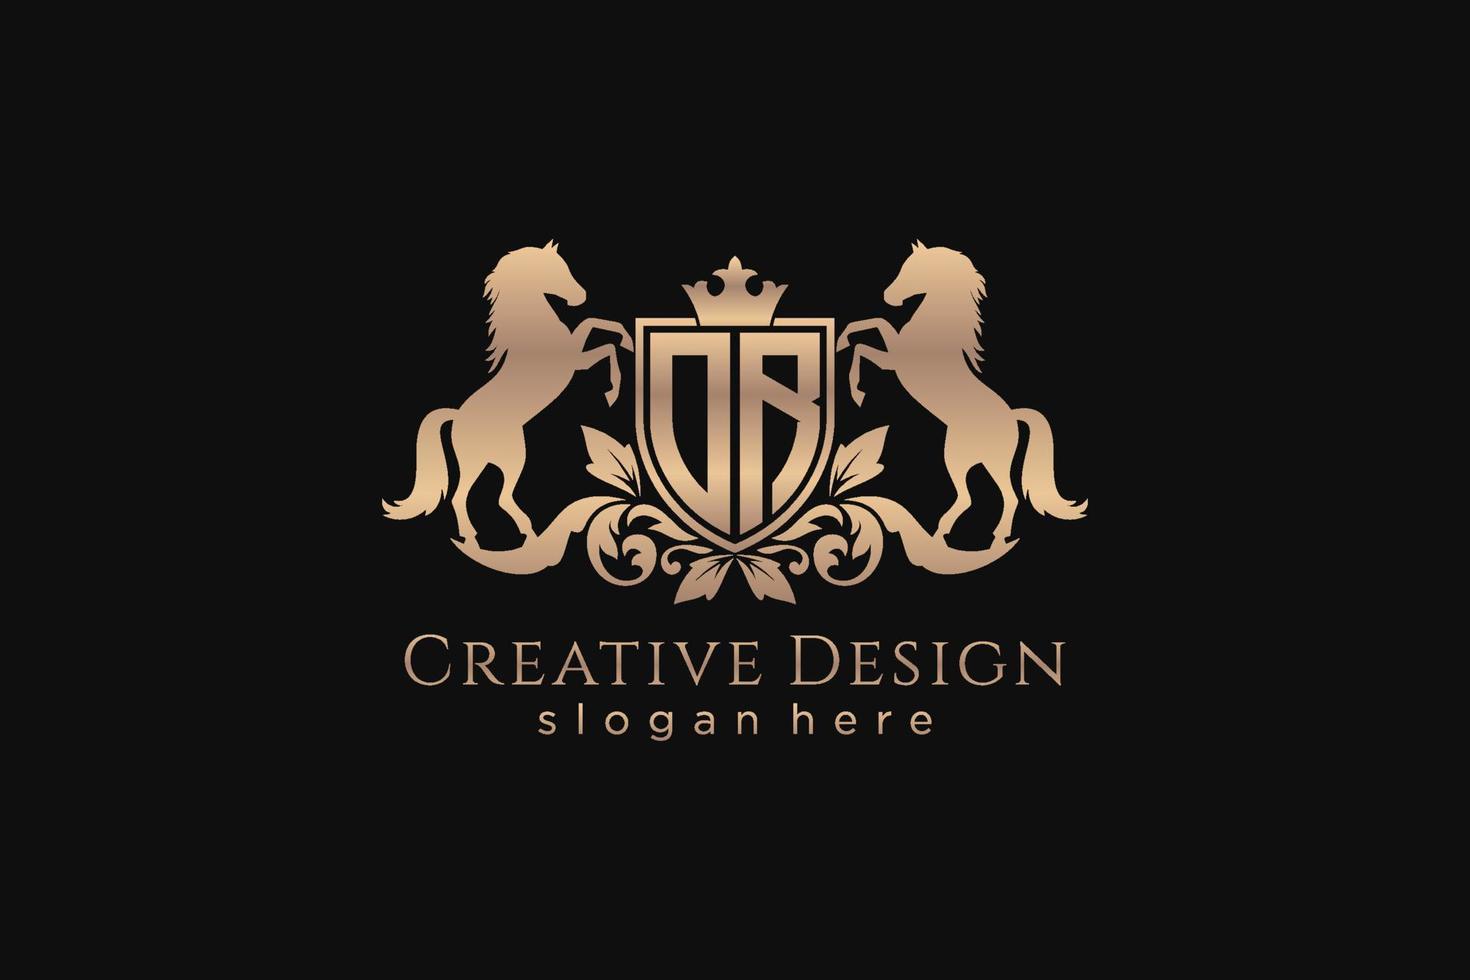 initial OR Retro golden crest with shield and two horses, badge template with scrolls and royal crown - perfect for luxurious branding projects vector